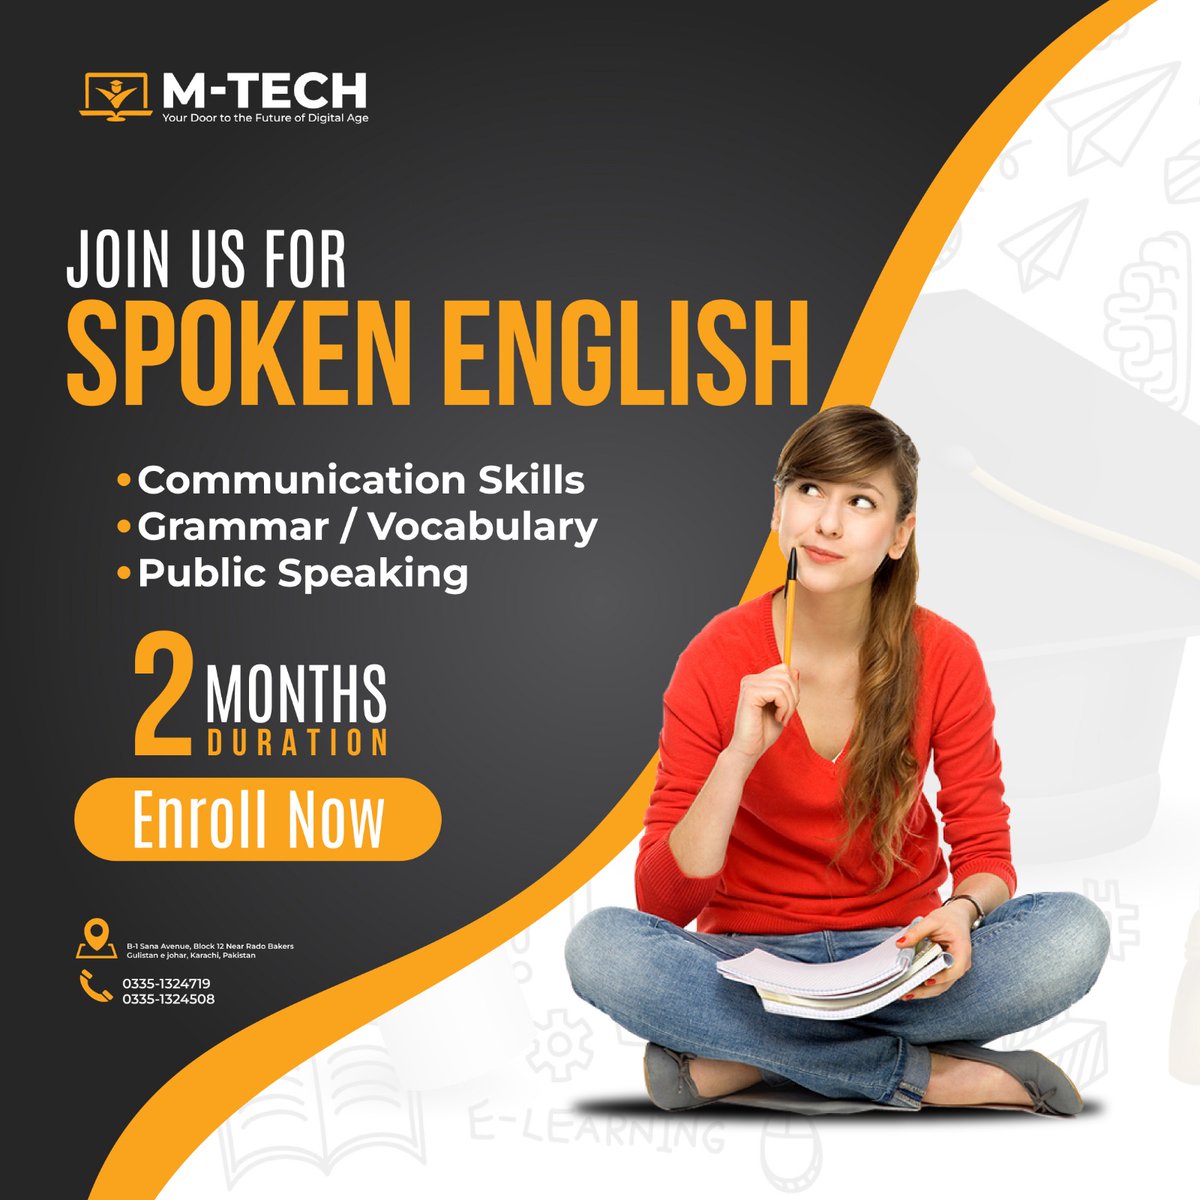 Elevate Your English: Join Our Spoken English Course for Confident Conversations! 🗣️🌟 #SpeakWithConfidence '#EnglishMastery
#ITInstitute
#TechEducation
#CodingSchool
#ITTraining
#LearnTech
#ProgrammingClass
#TechSkills
#ITCareer
#DigitalLearning
#CodeCamp
#ITCertification